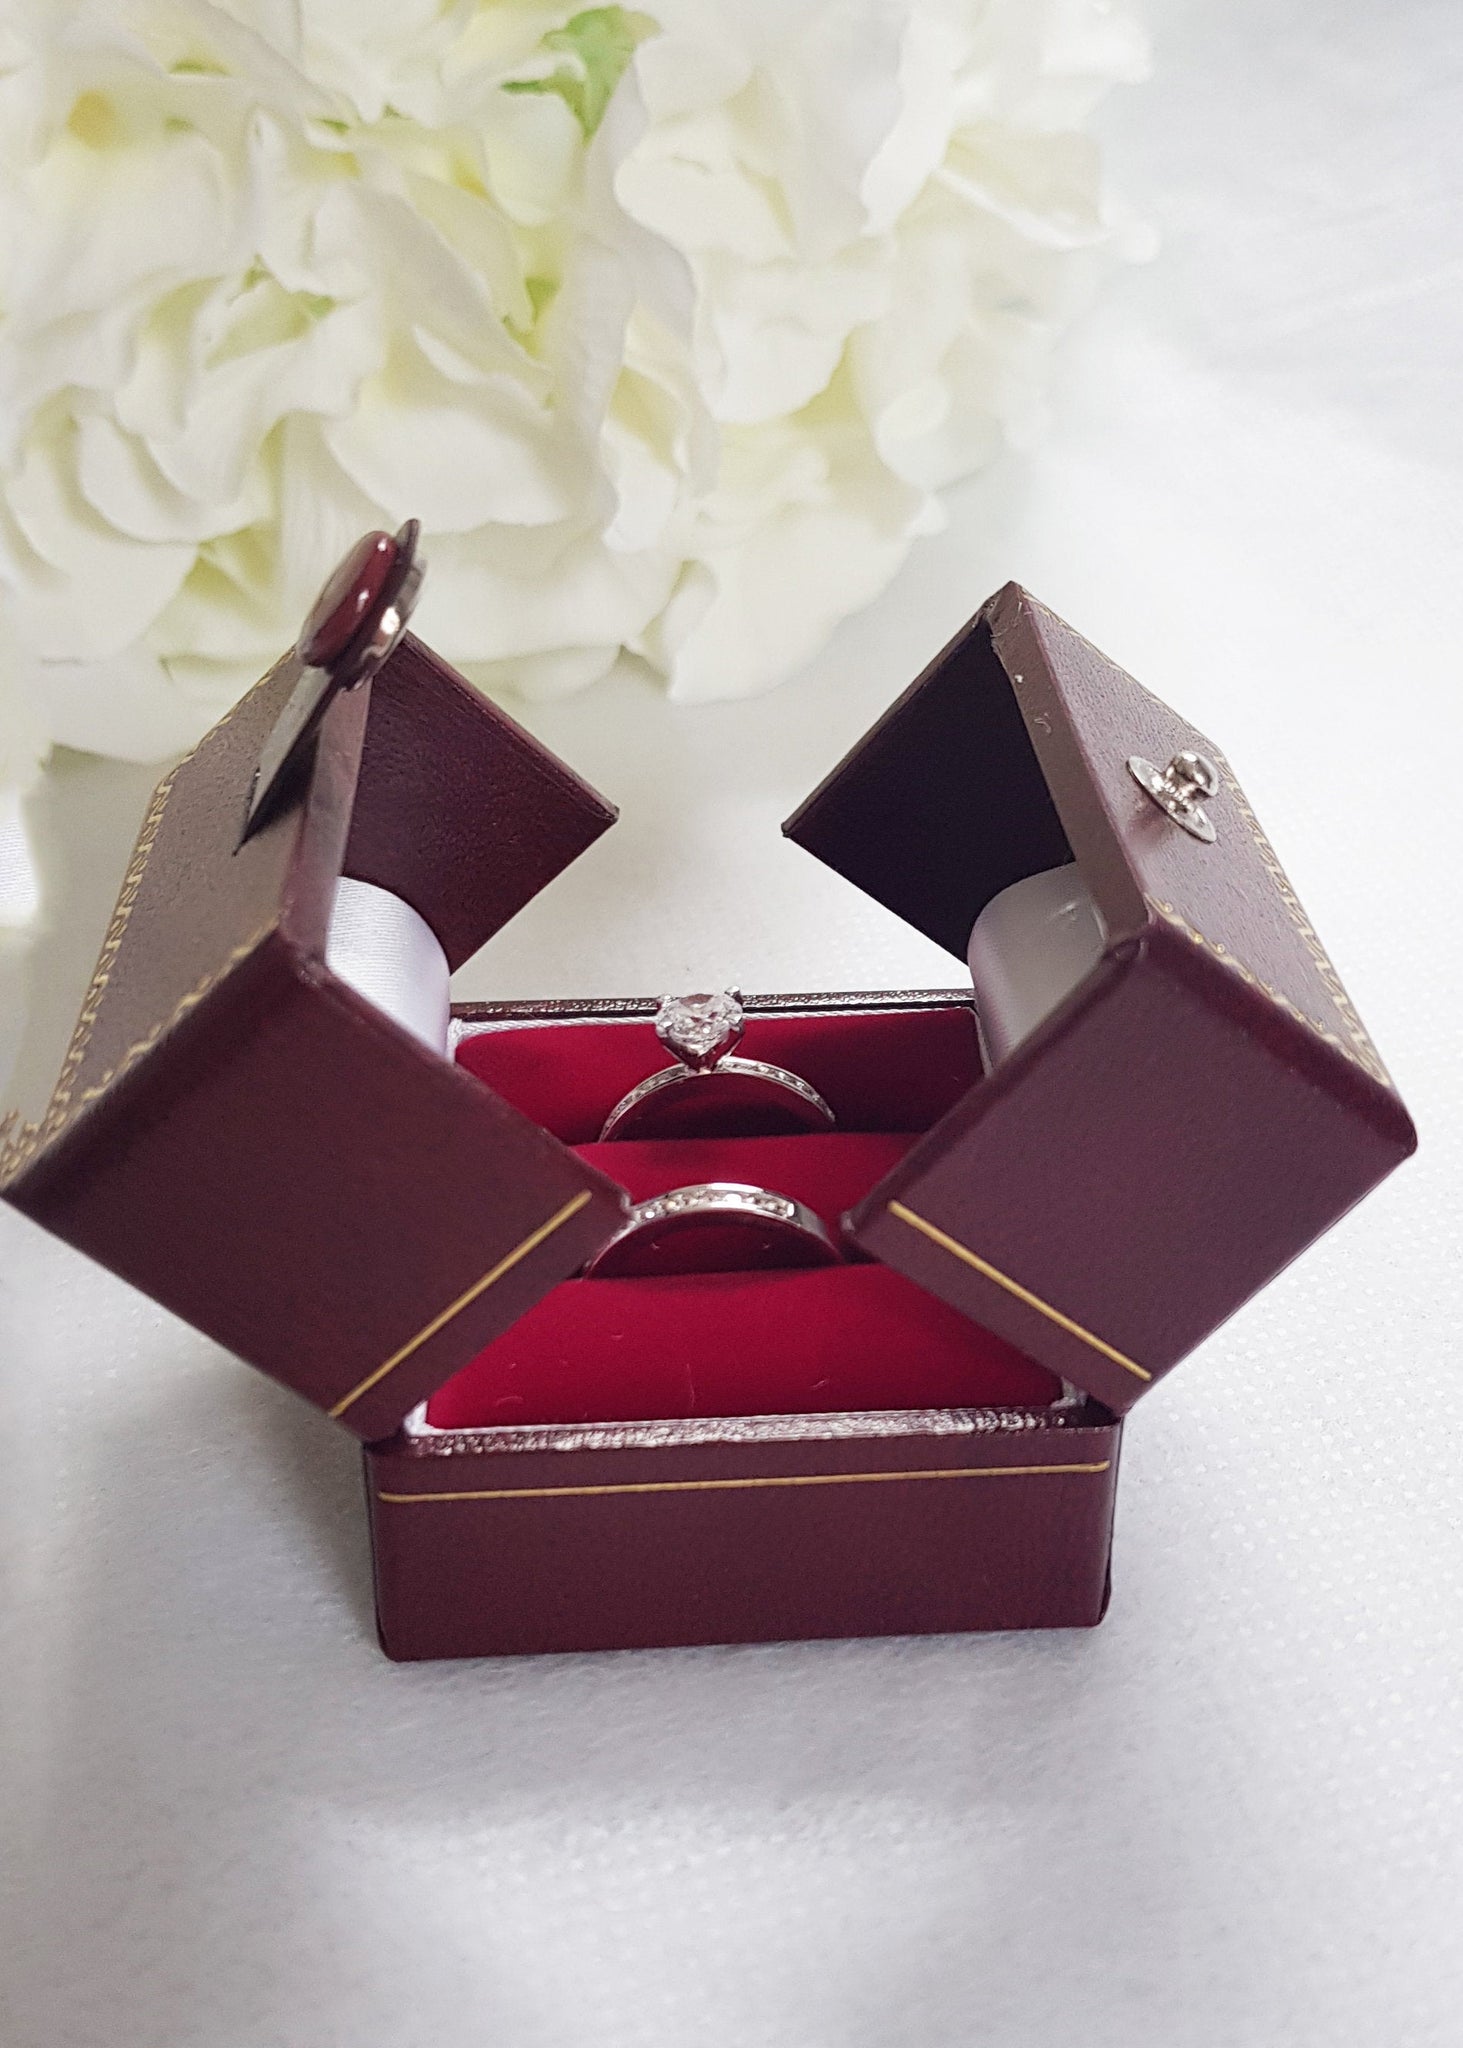 1PC Wedding Ring Box Retro Ring Container Decorative Jewelry Packing Holder  | eBay